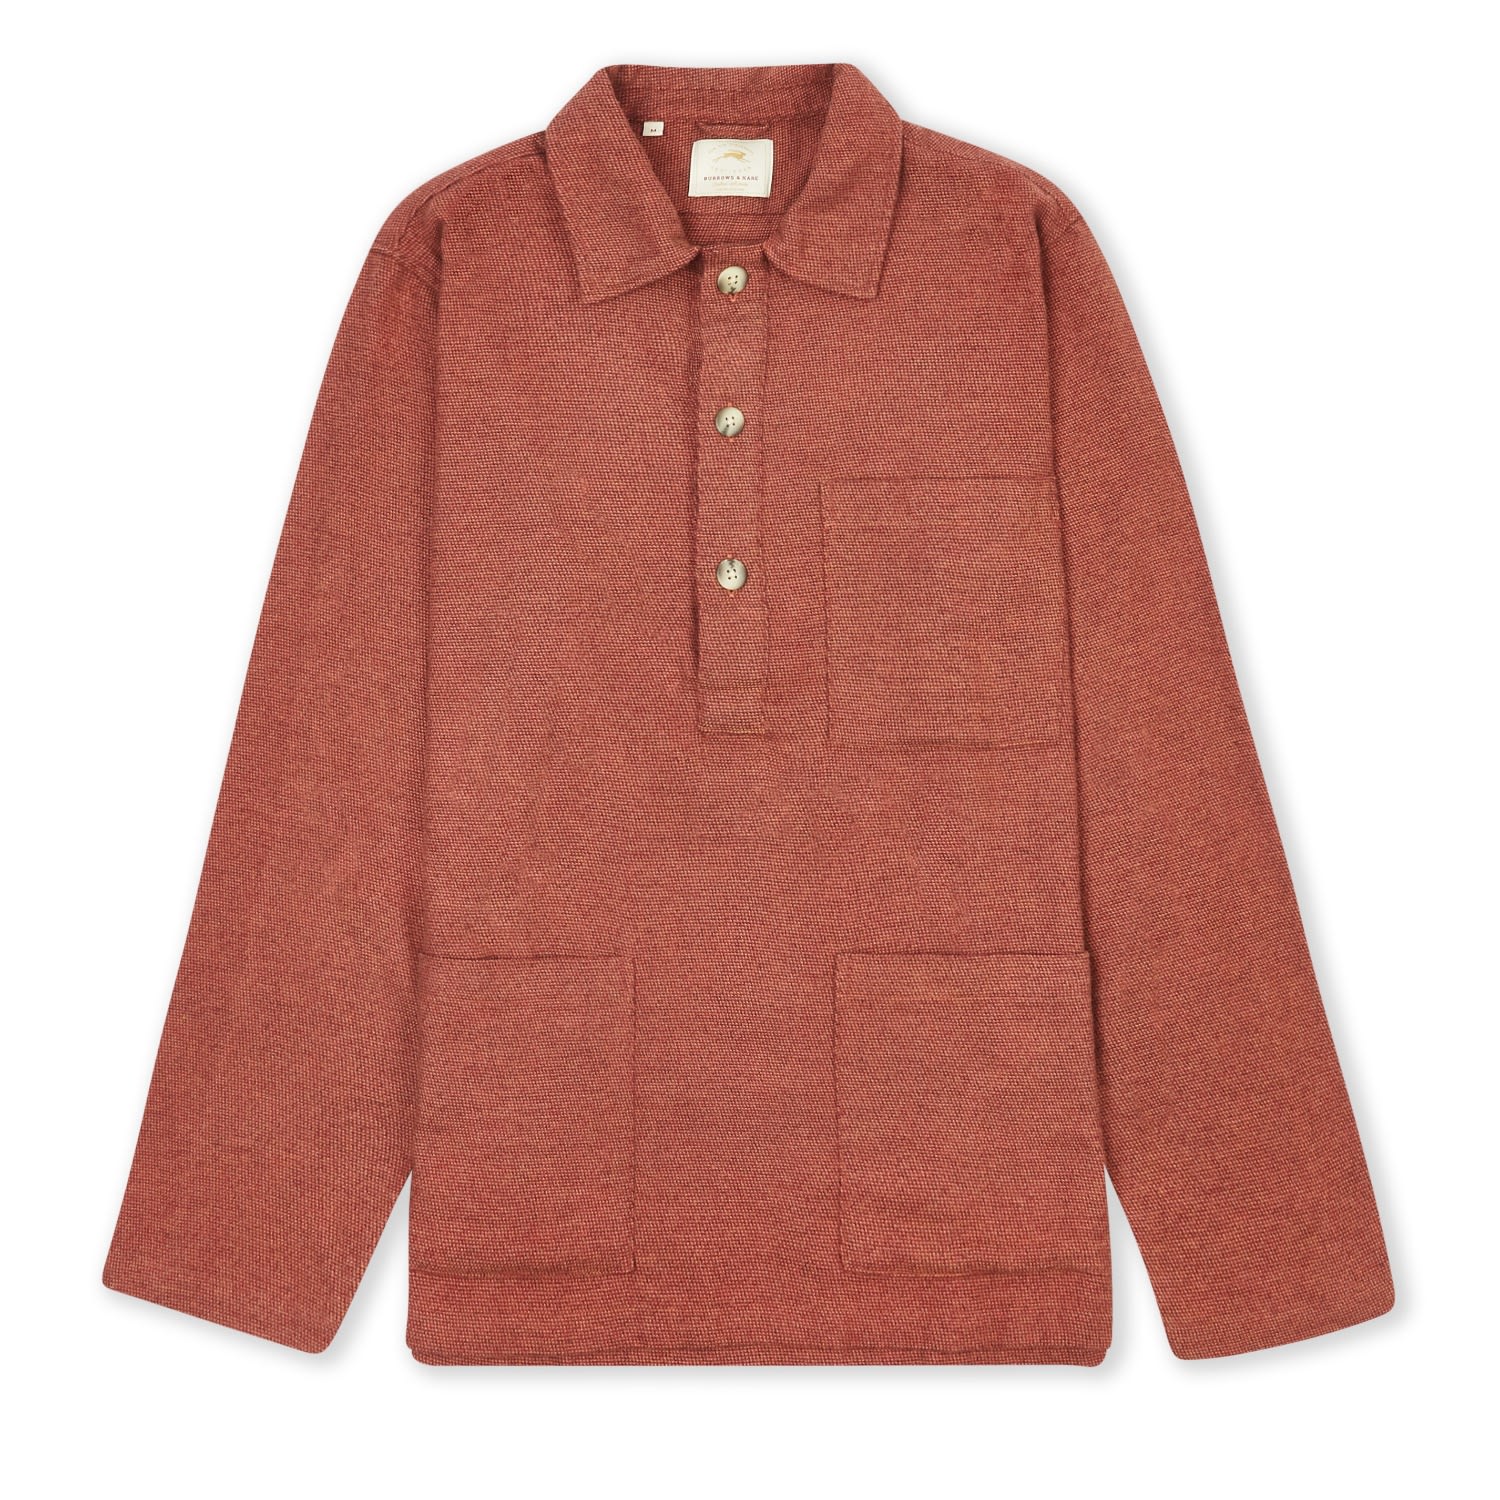 Men's Houndstooth Pull Over Shirt - Red XXL Burrows & Hare